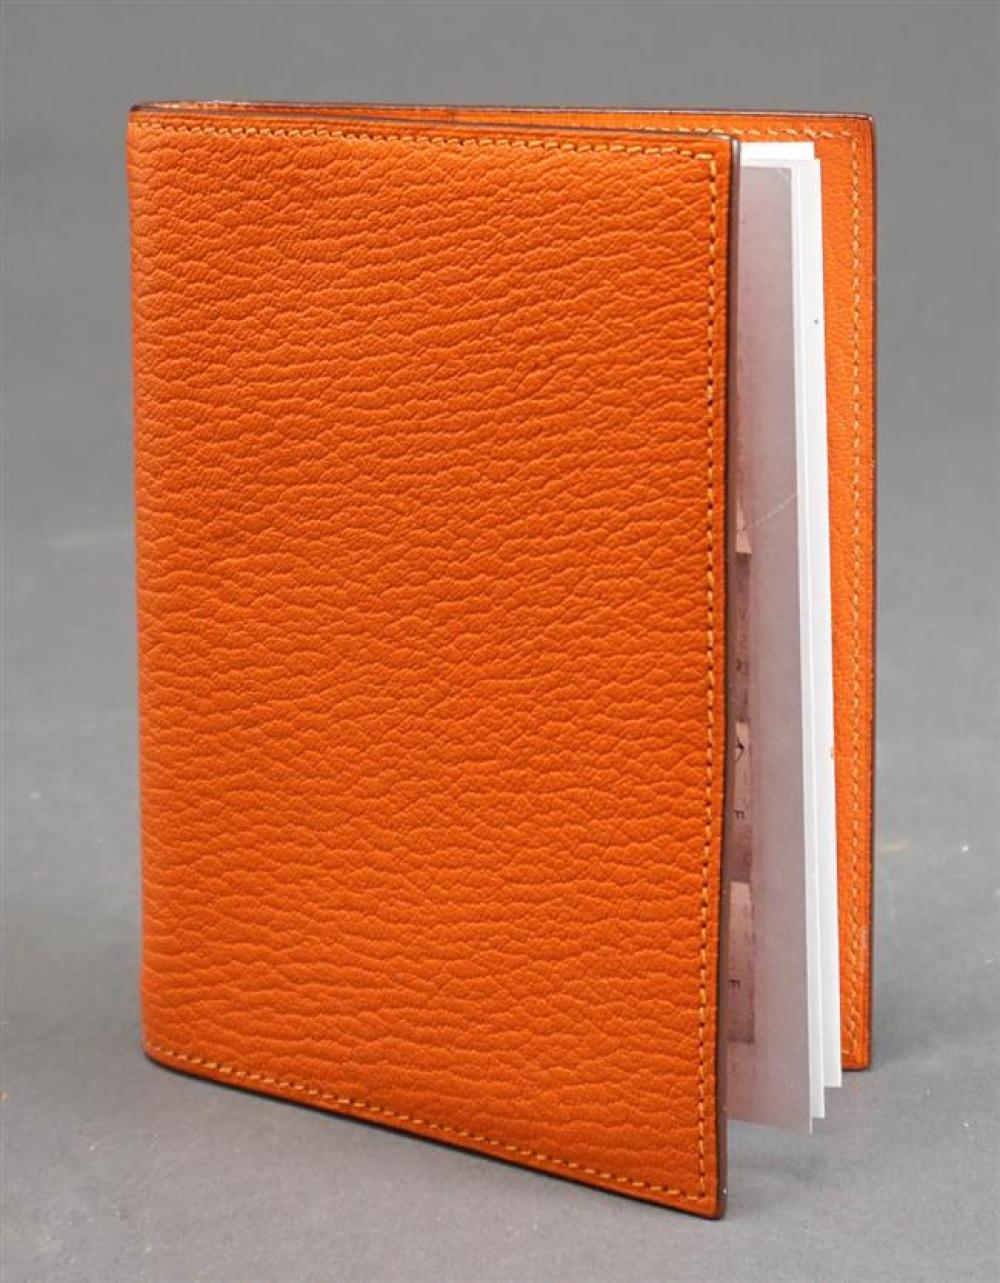 HERMES LEATHER AGENDA BOOK WITH 3243bd